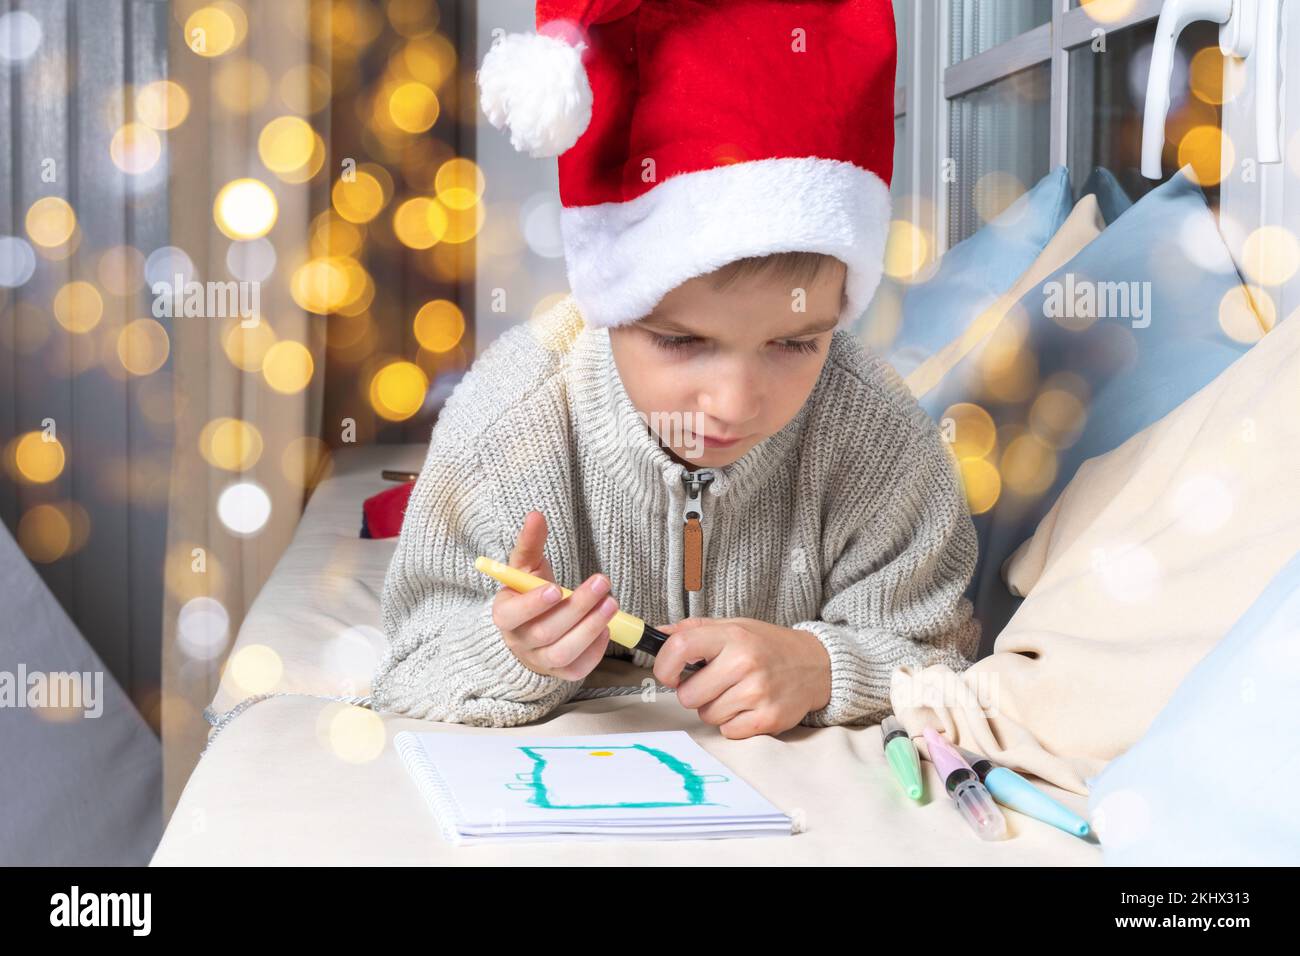 A wish list for a Christmas miracle. A serious focused kid in a Santa hat writes a wish list or a letter to Santa at home. The boy draws a phone. A ch Stock Photo